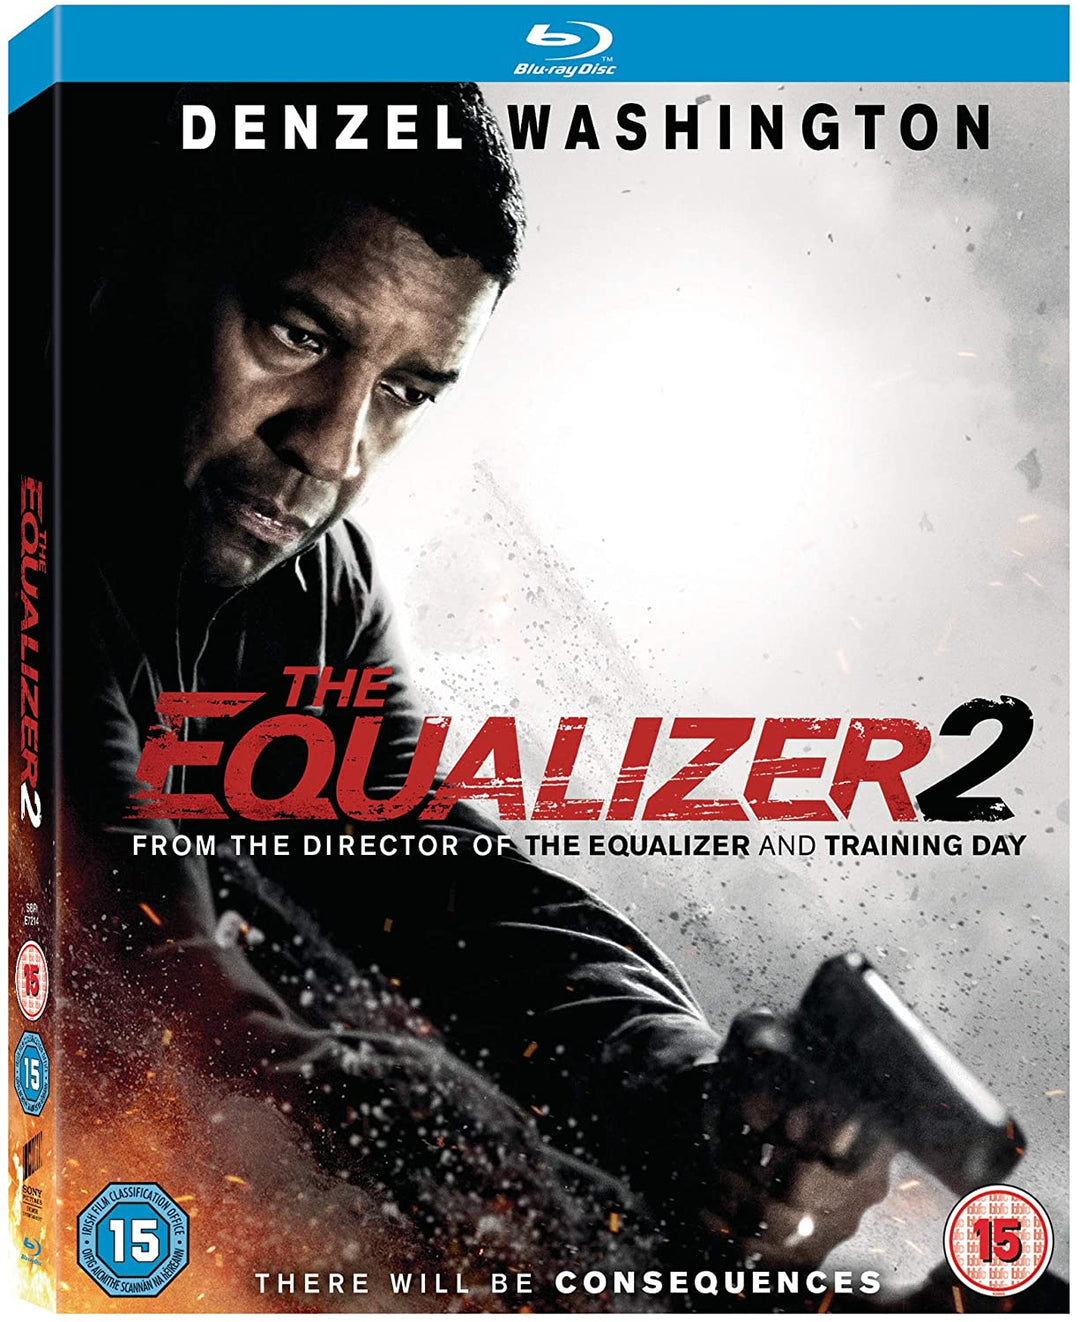 The Equalizer 2 - Action/Thriller [Blu-ray]